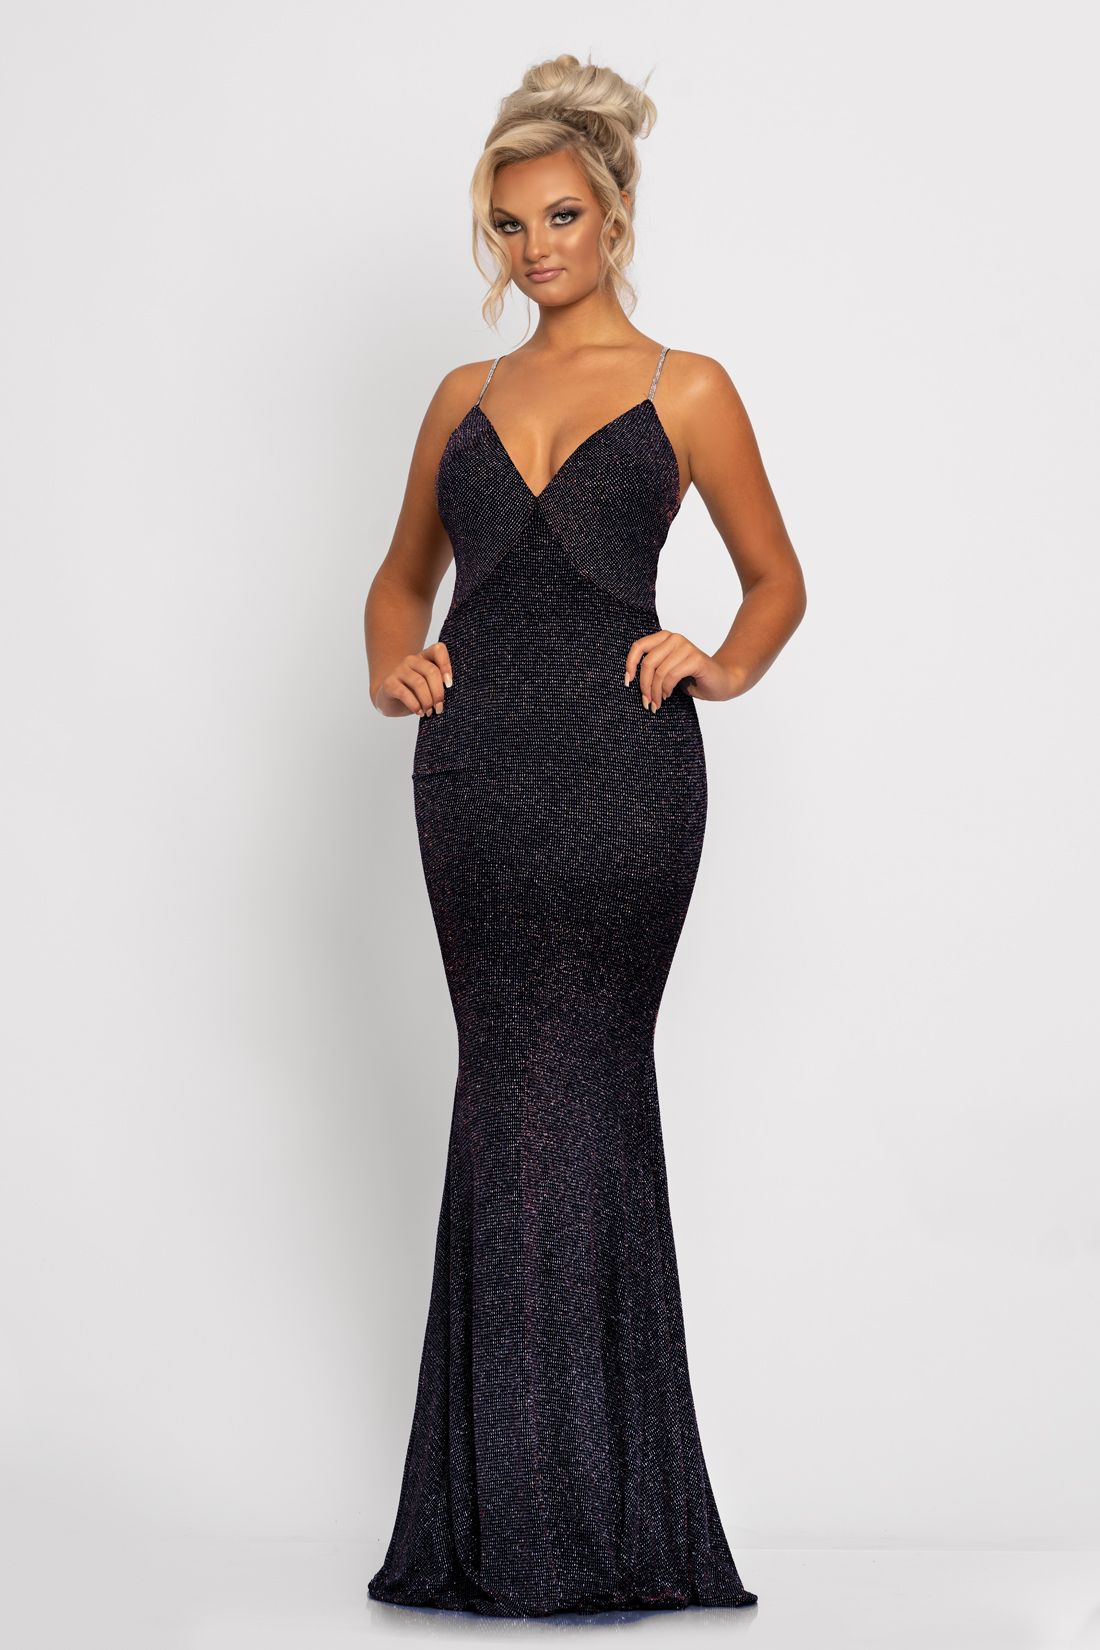 Johnathan Kayne 2290 This long prom dress is glitter jersey with a v neckline and features an embellished spaghetti straps that form a racer back.   Colors  Blue, Gold  Size  00, 0, 2, 4, 6, 8, 10, 12, 14, 16